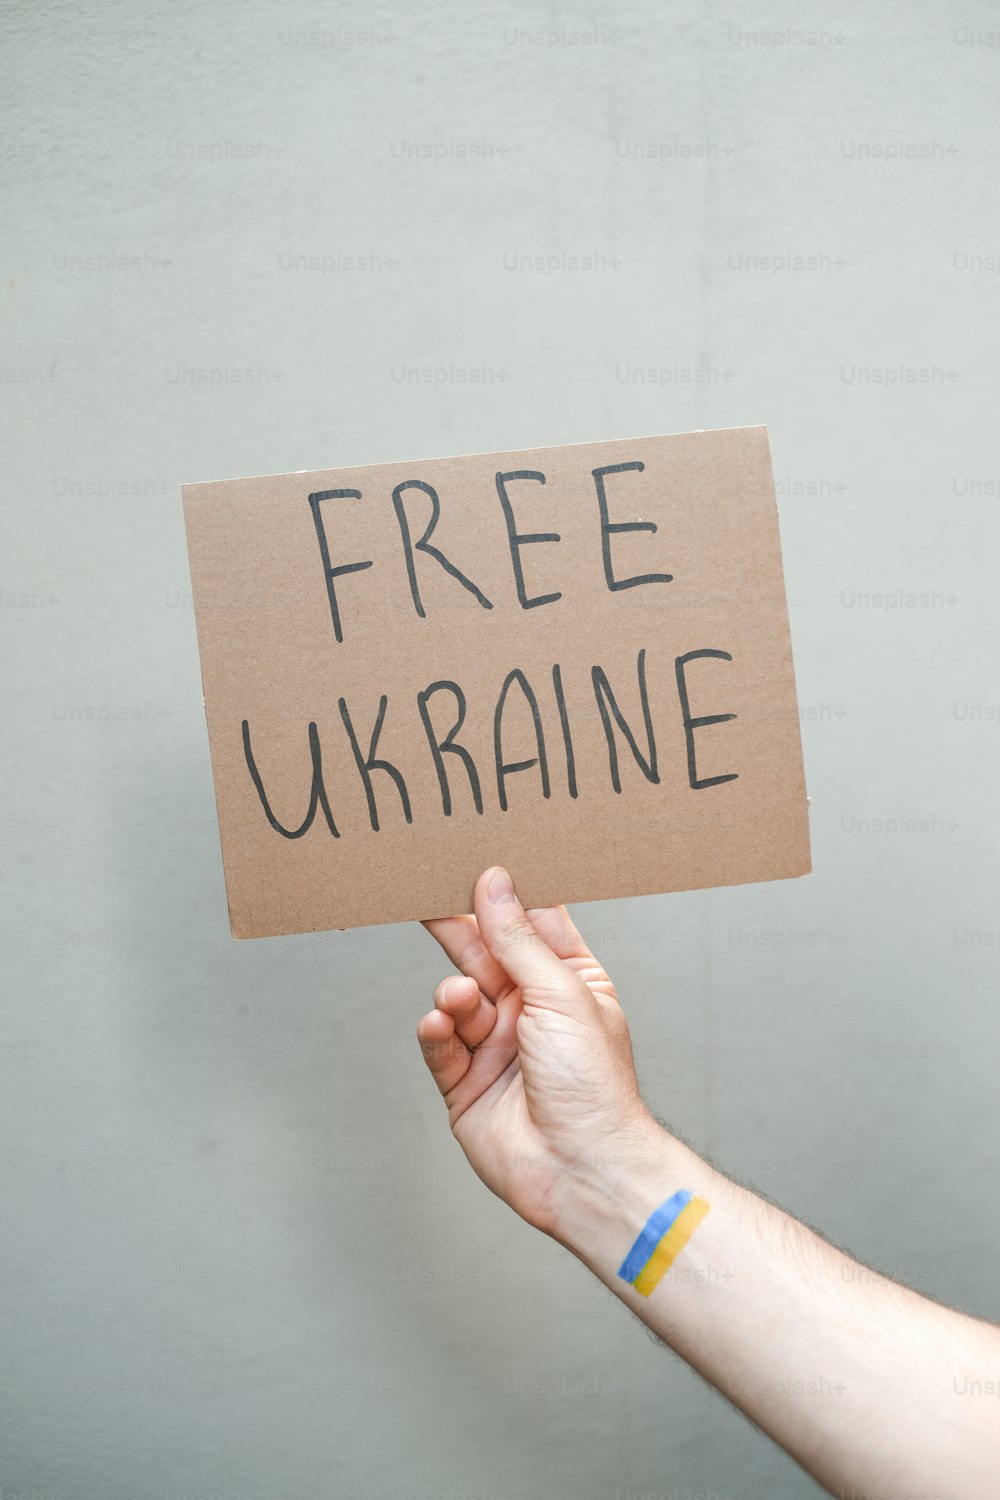 a person holding a sign that says free ukraine